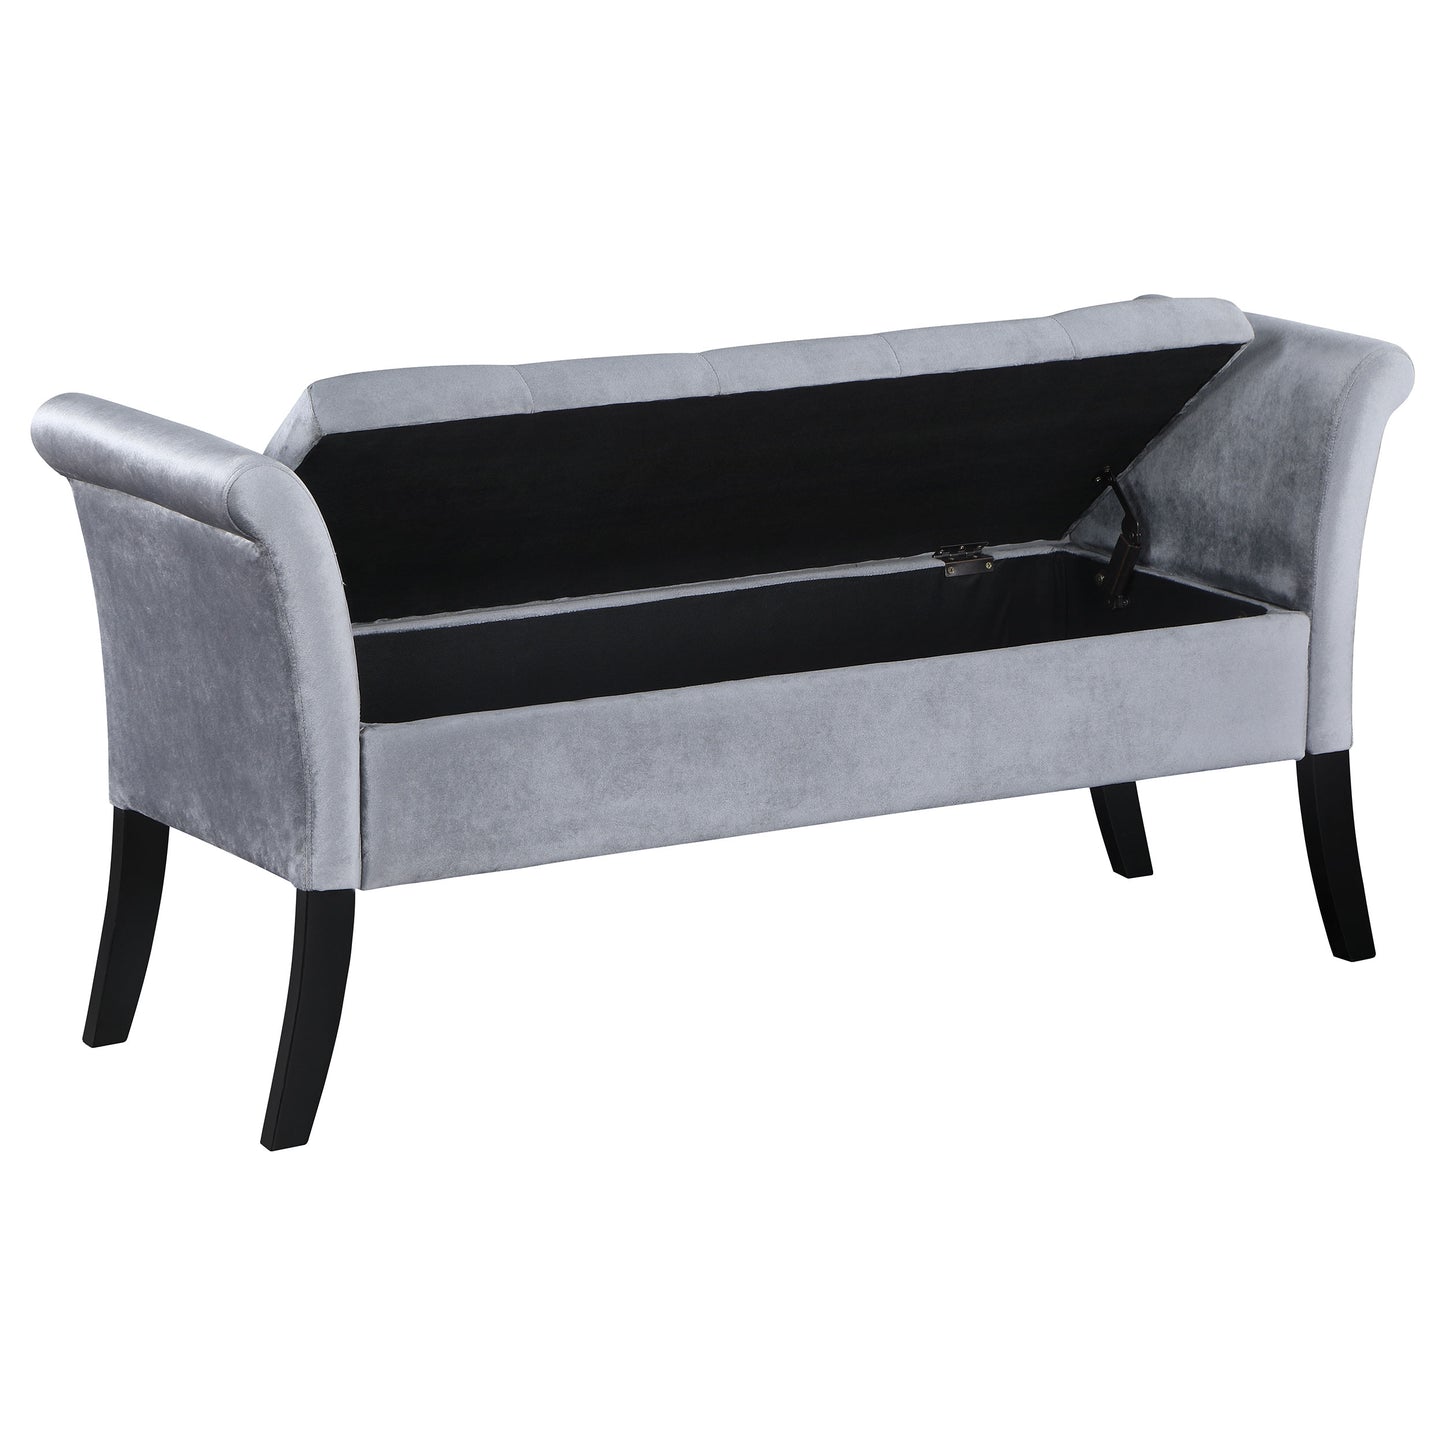 Farrah Upholstered Rolled Arms Storage Bench Silver and Black